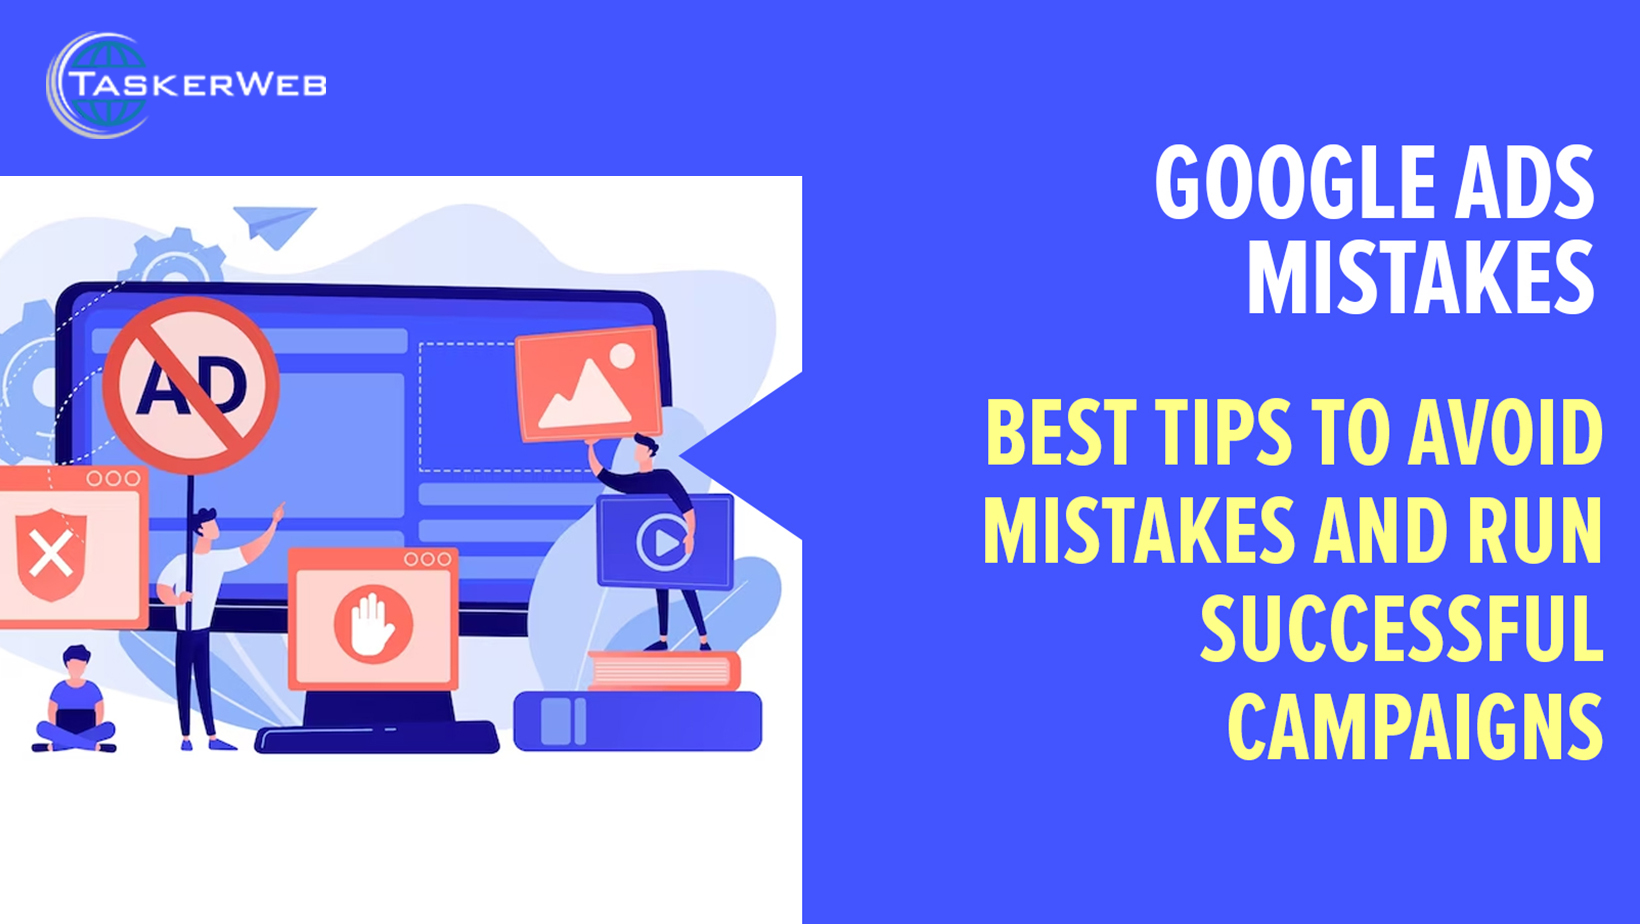 Google Ads Mistakes: Best Tips To Avoid Mistakes and Run Successful Campaigns